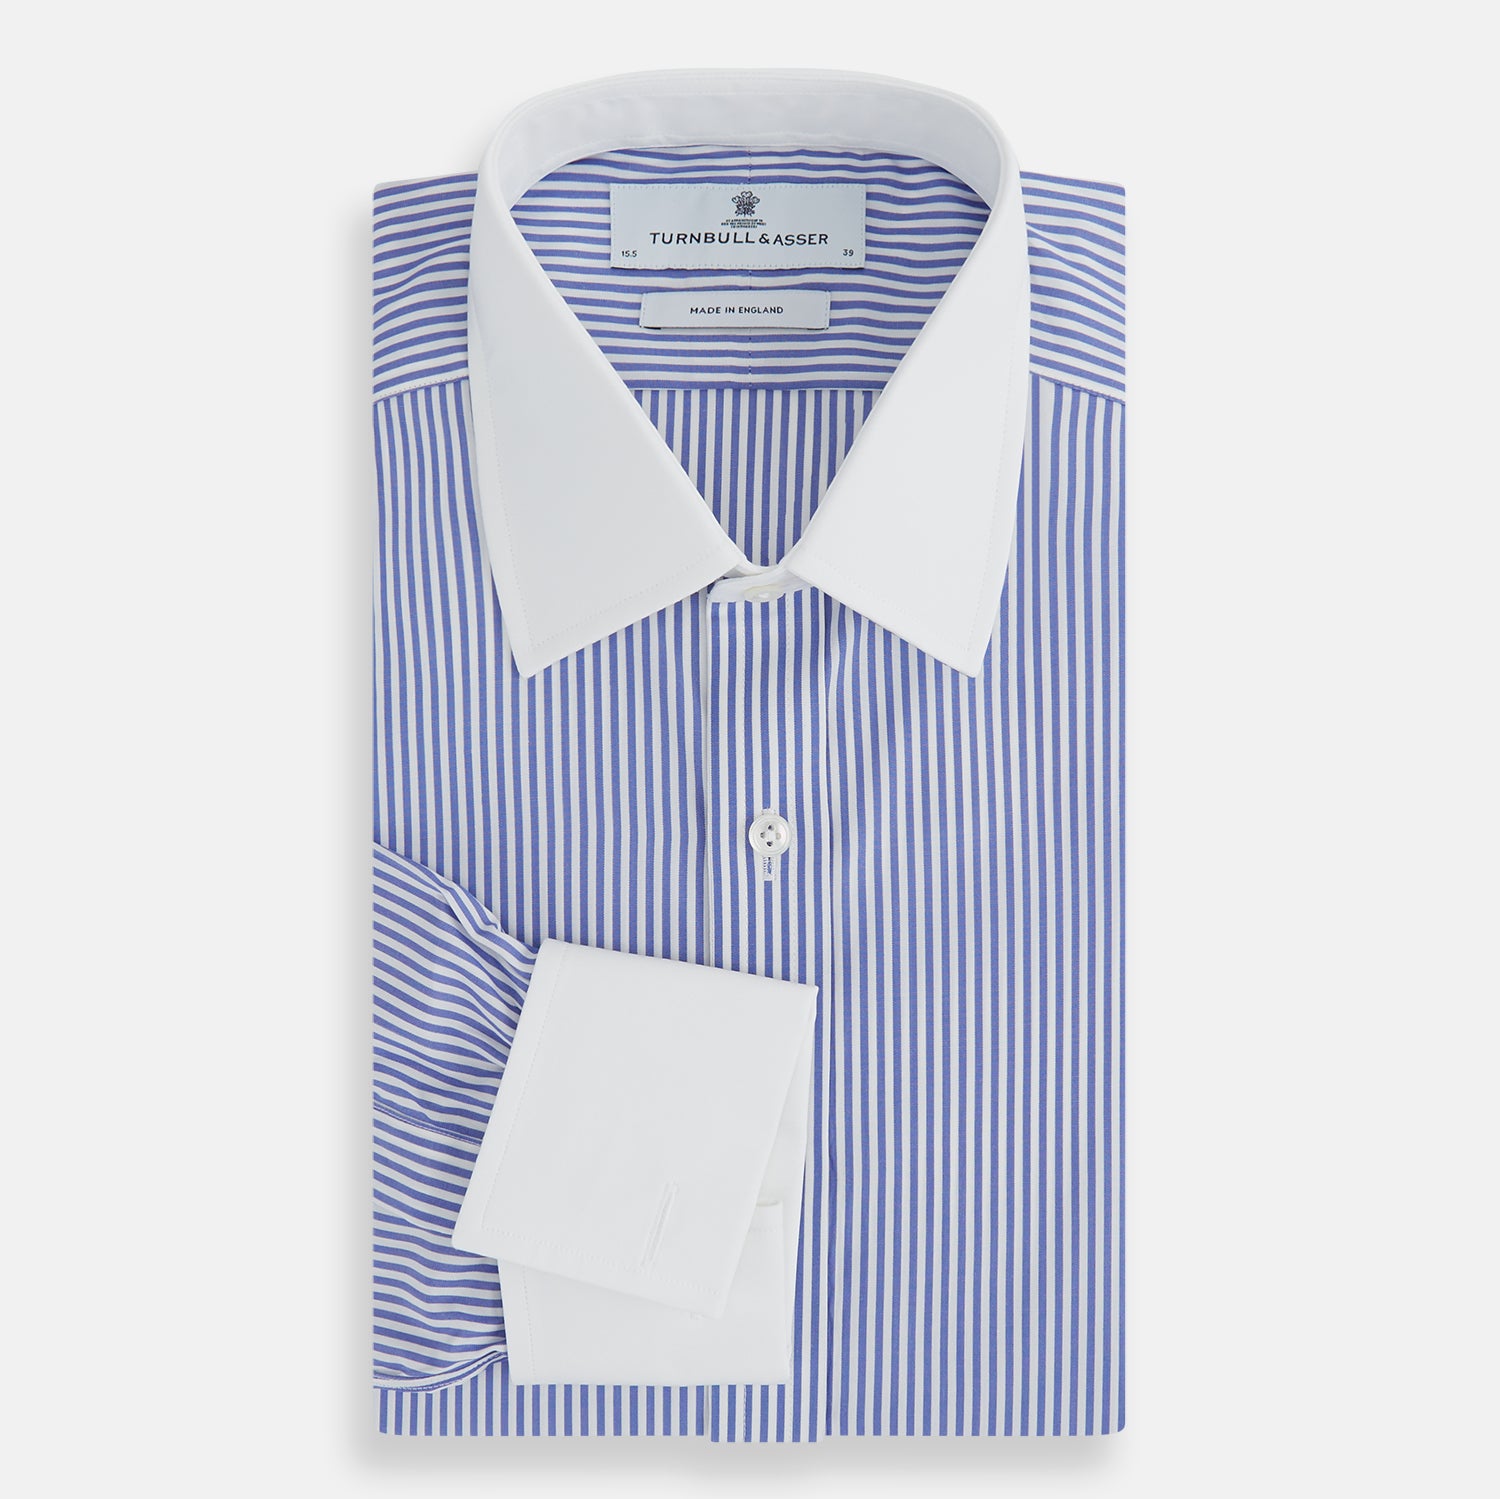 The Gekko Shirt with White Classic T&A Collar and Double Cuffs